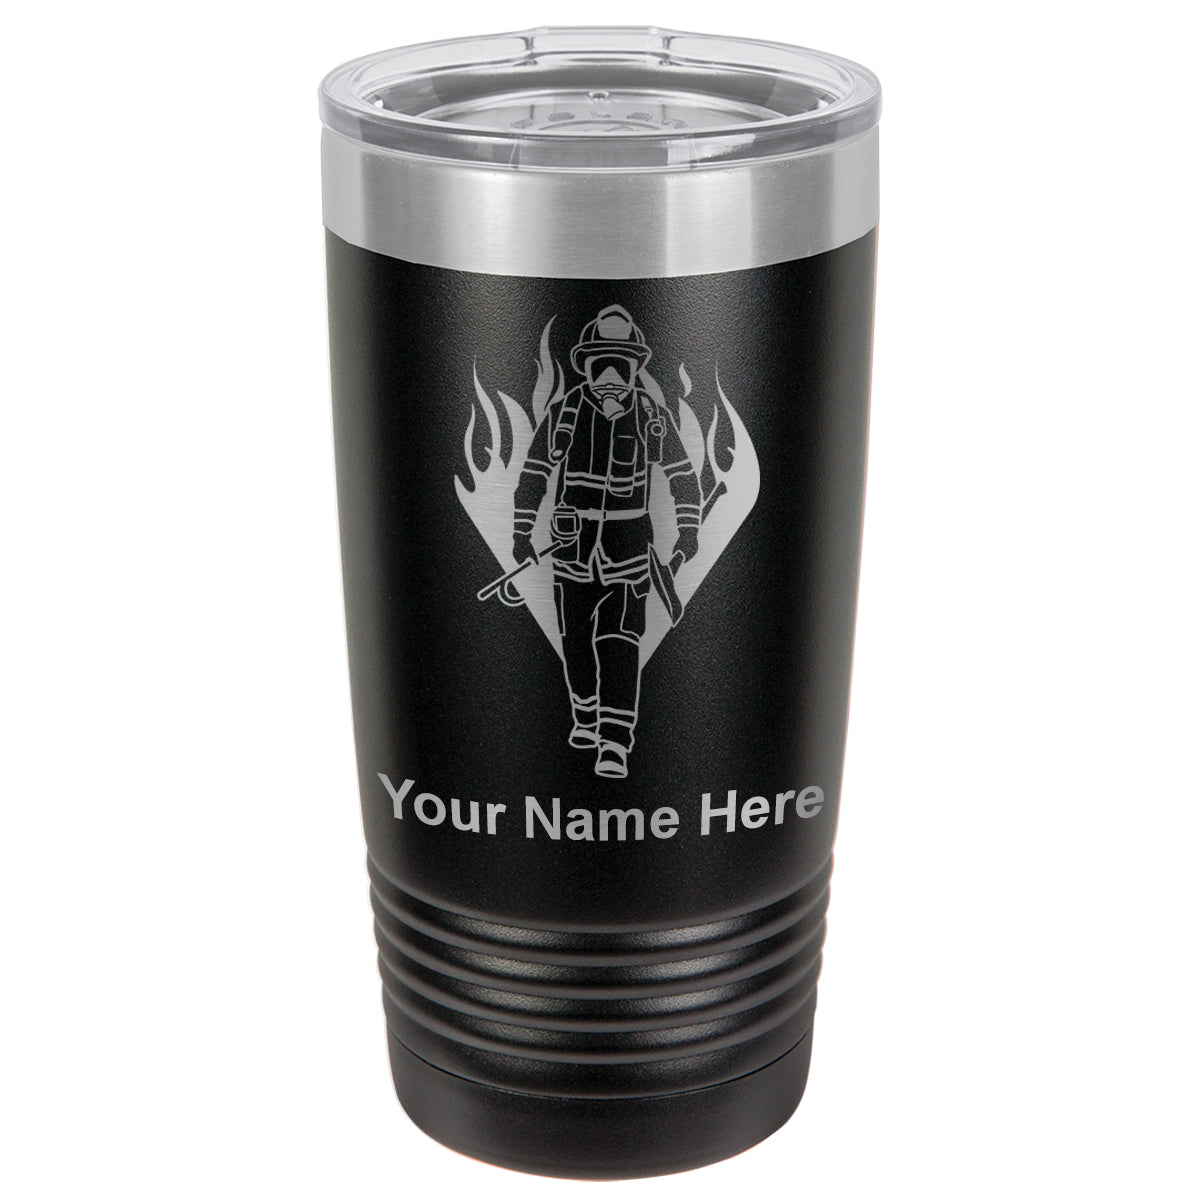 20oz Vacuum Insulated Tumbler Mug, Fireman, Personalized Engraving Included